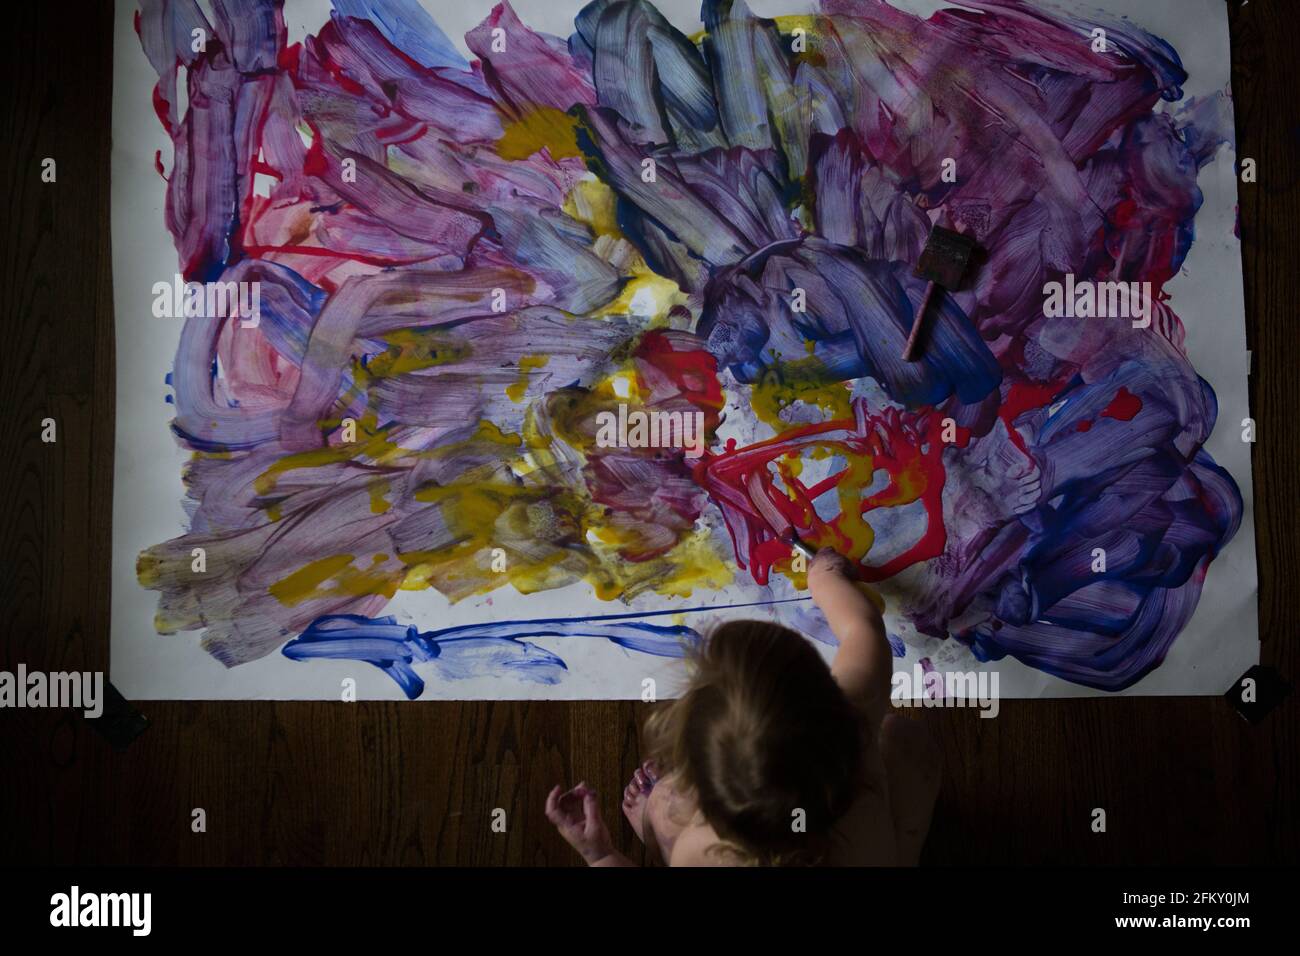 Overhead view of young toddler and their fingerpaint project Stock Photo